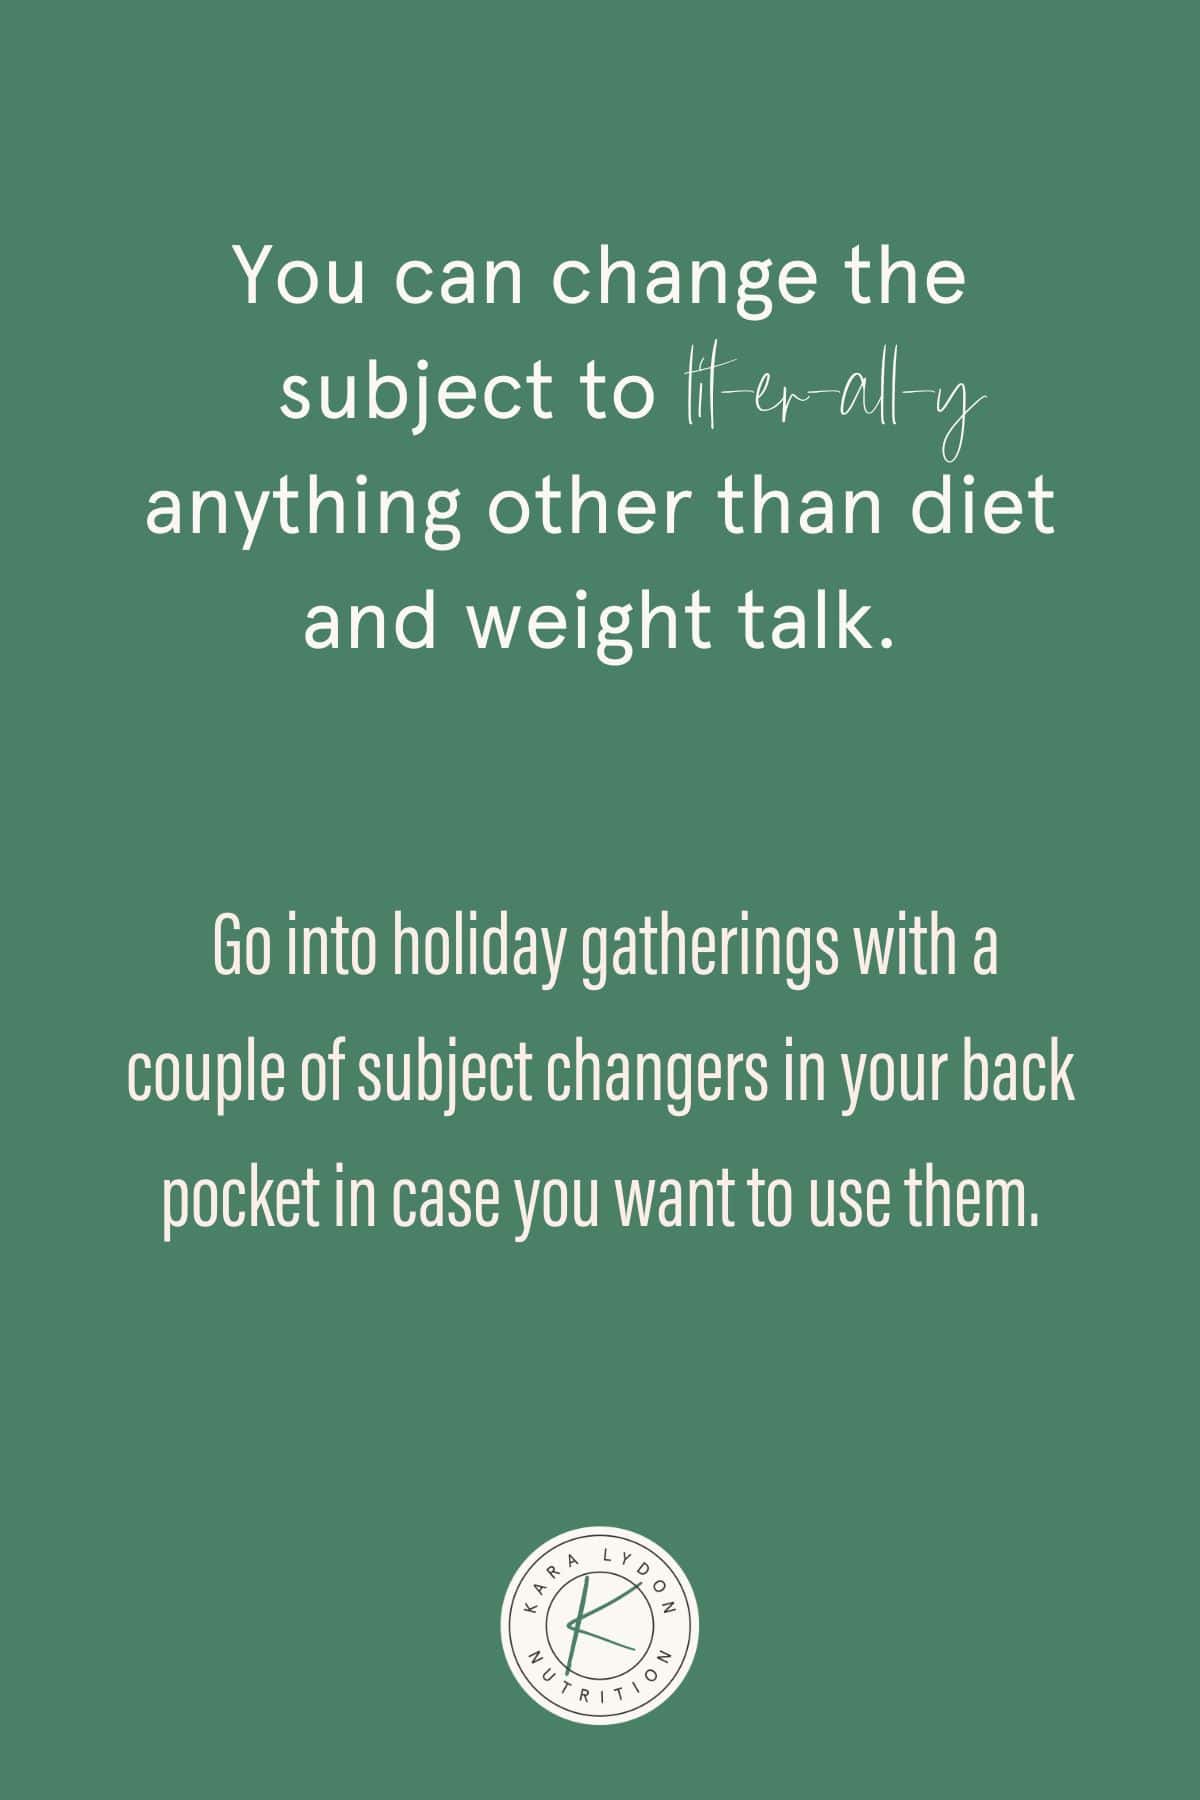 Graphic with quote: "You can change the topic to literally anything other than talking about diet and weight.  Attend holiday gatherings with a couple of theme changers in your back pocket in case you want to use them."